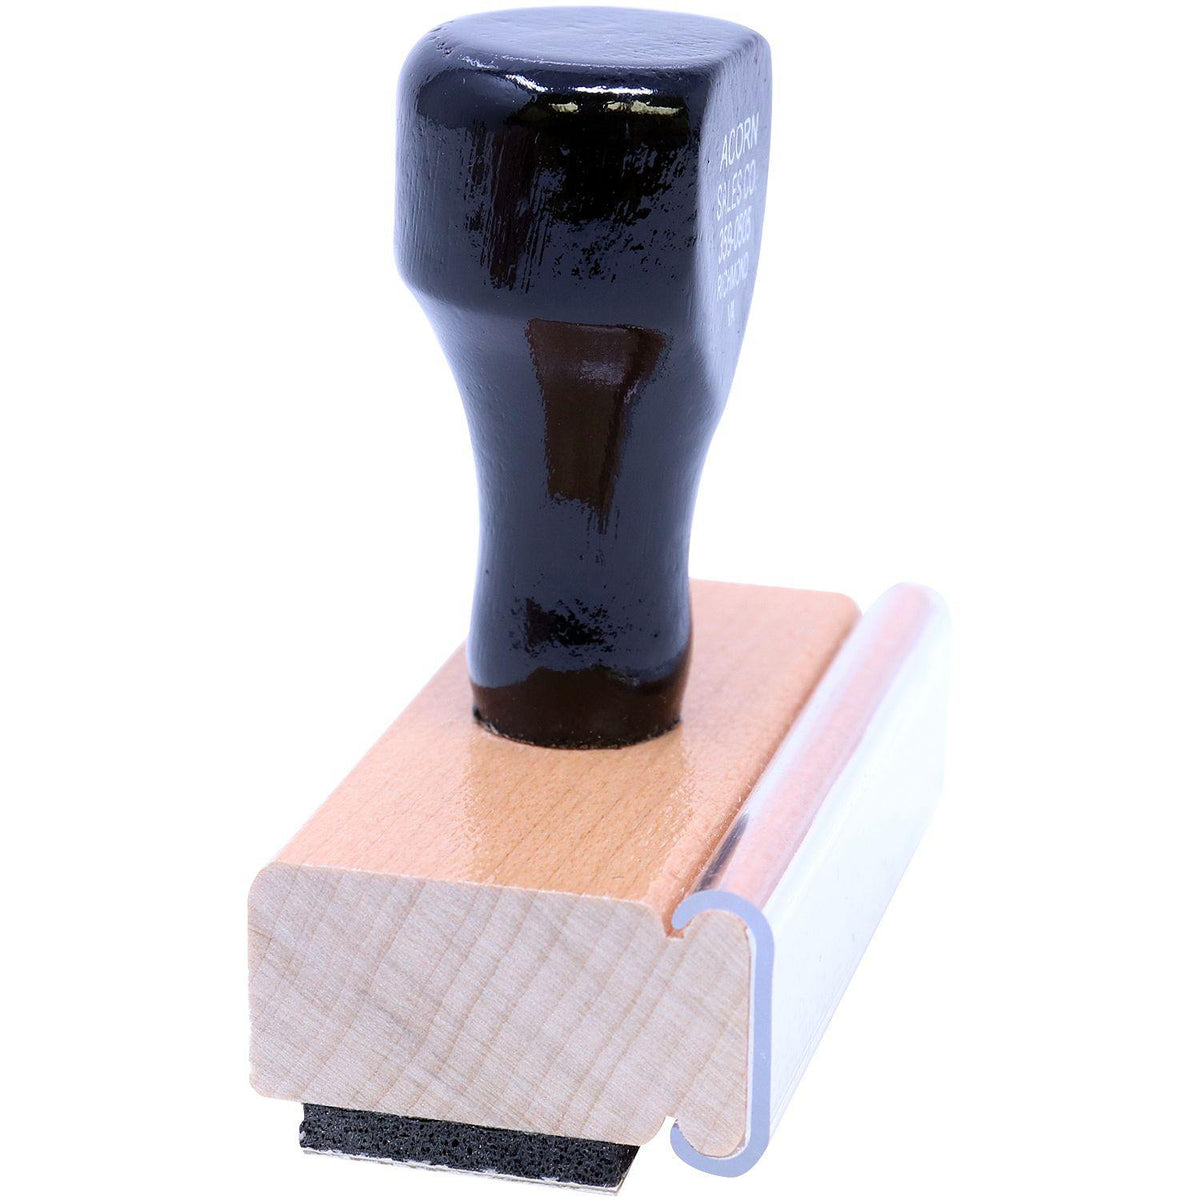 No Deposits Rubber Stamp - Engineer Seal Stamps - Brand_Acorn, Impression Size_Small, Stamp Type_Regular Stamp, Type of Use_Business, Type of Use_Finance